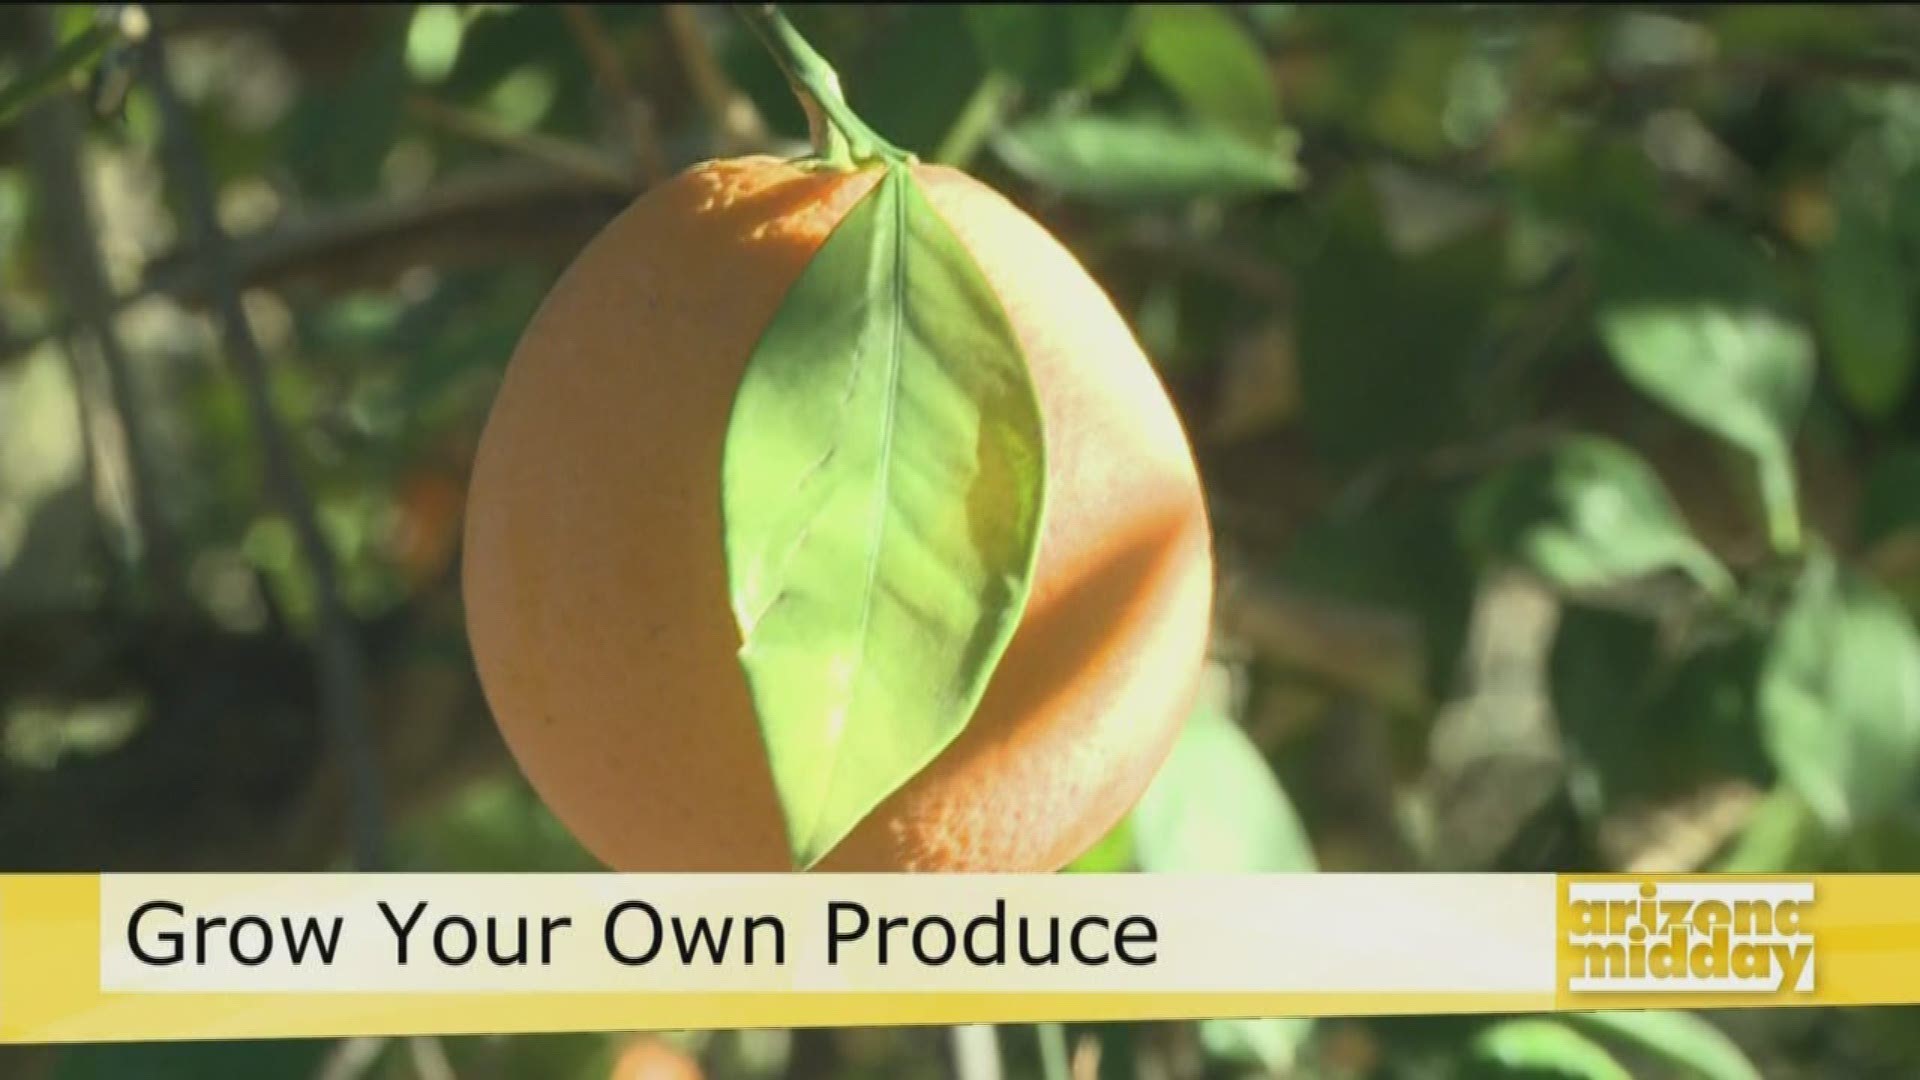 Farmer Greg with the Urban Farm shows us how to get growing this spring with fruit trees.